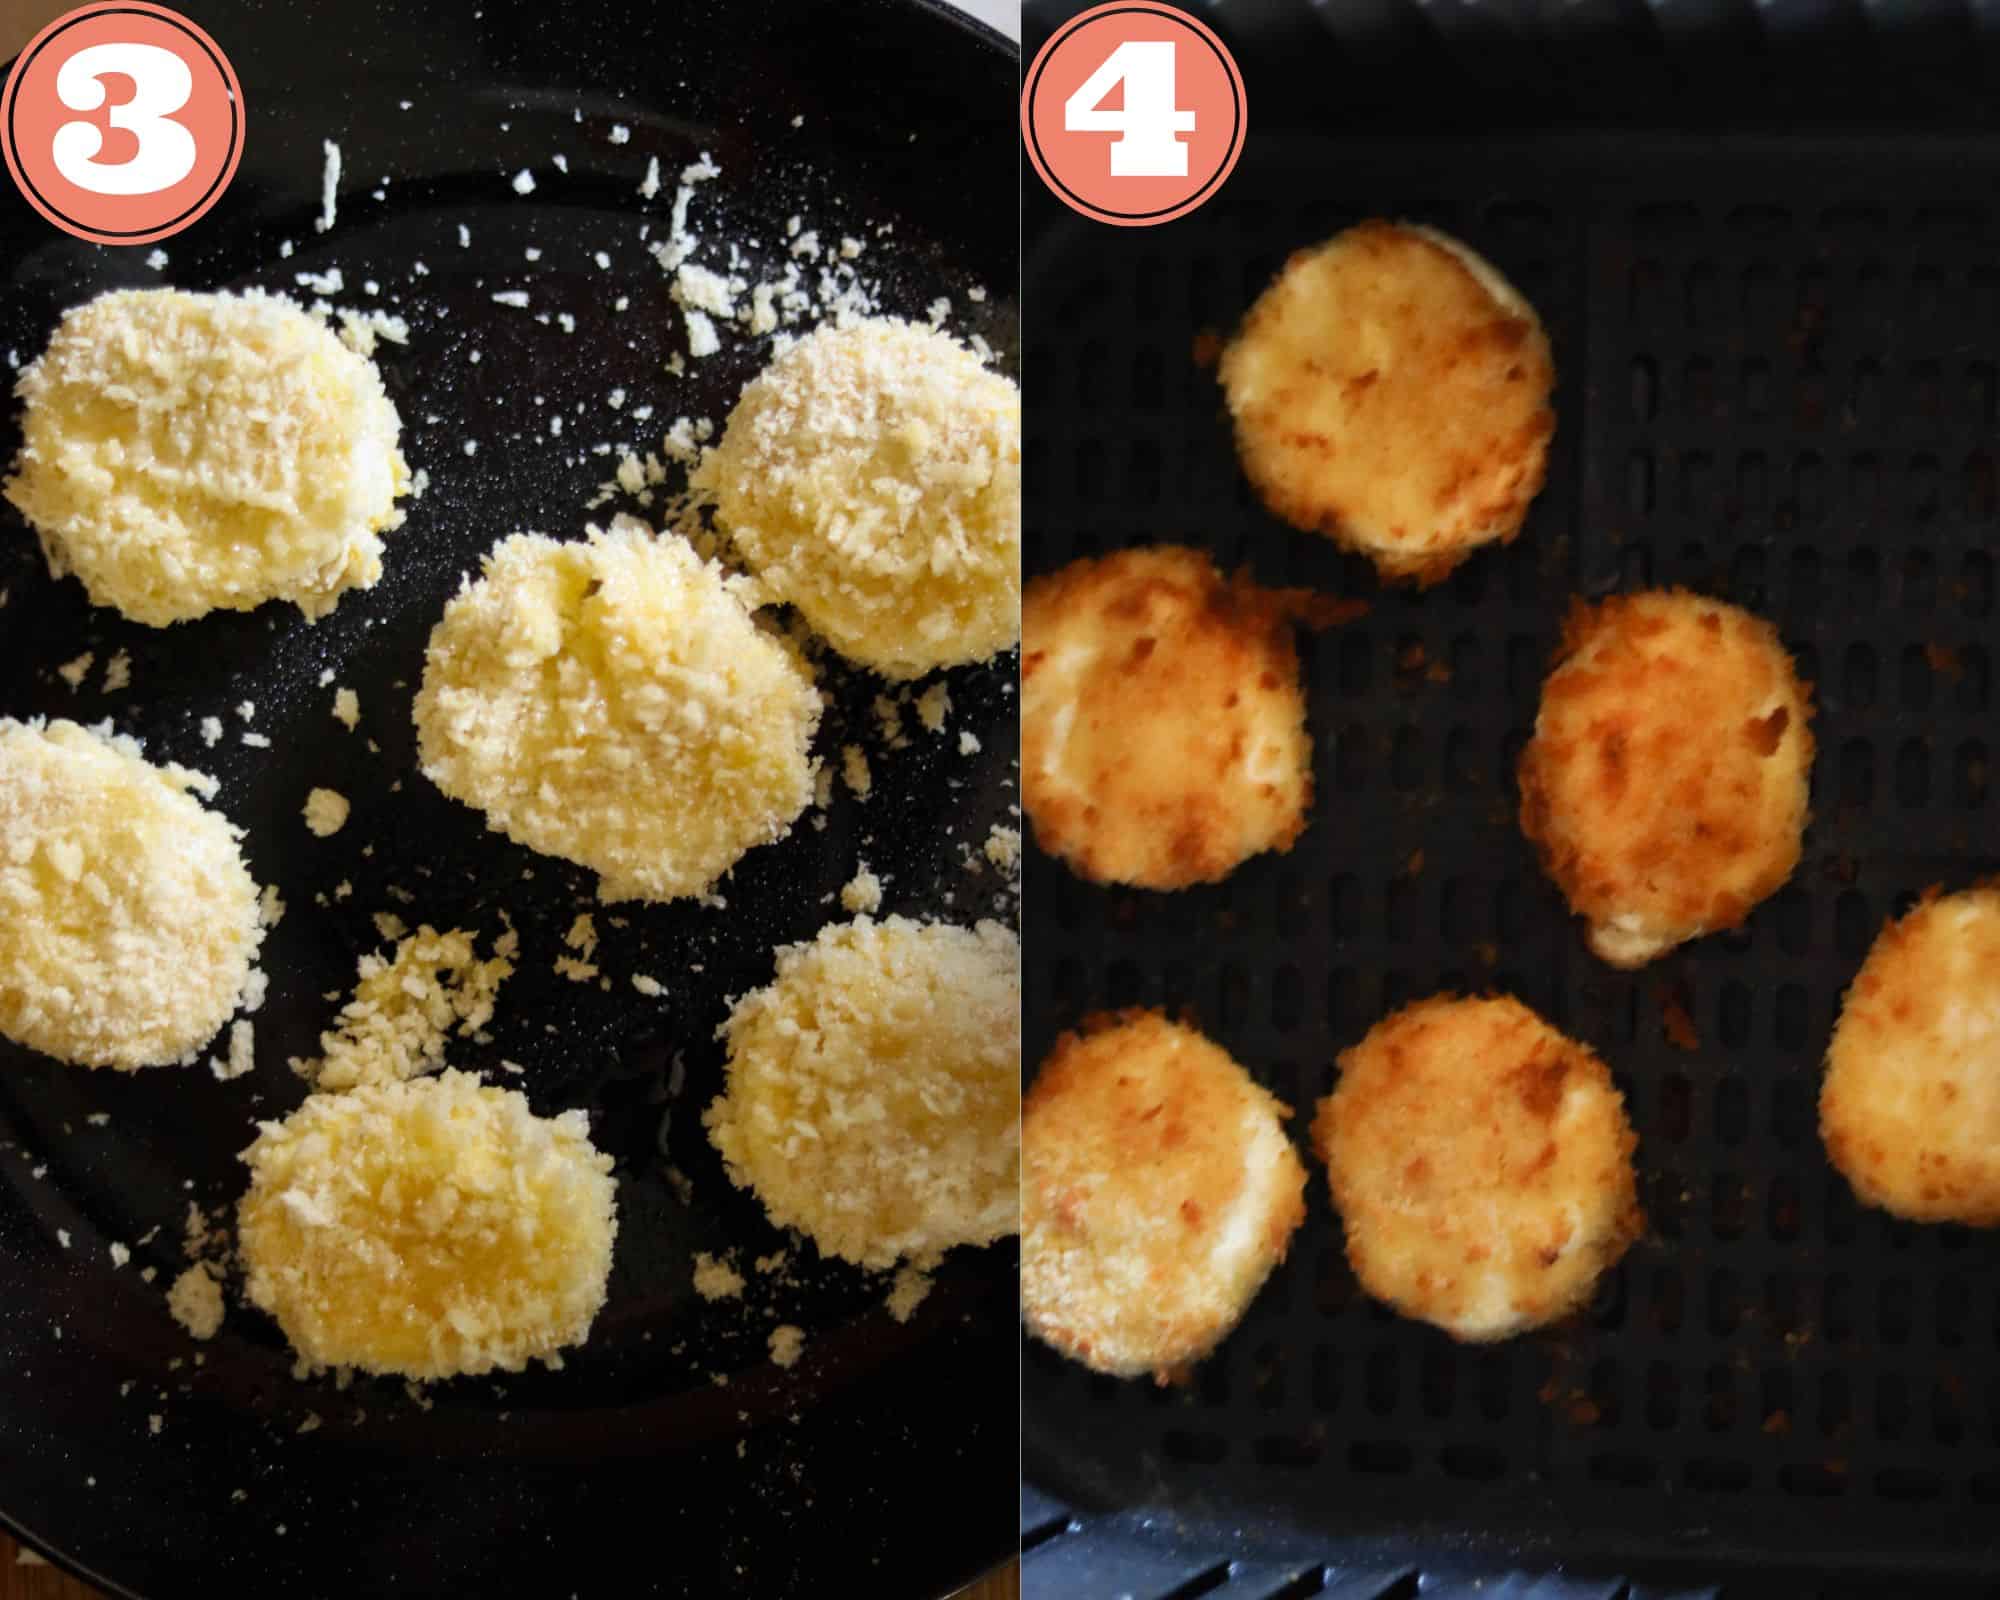 Side by side pictures of breaded goat cheese and fried goat cheese.